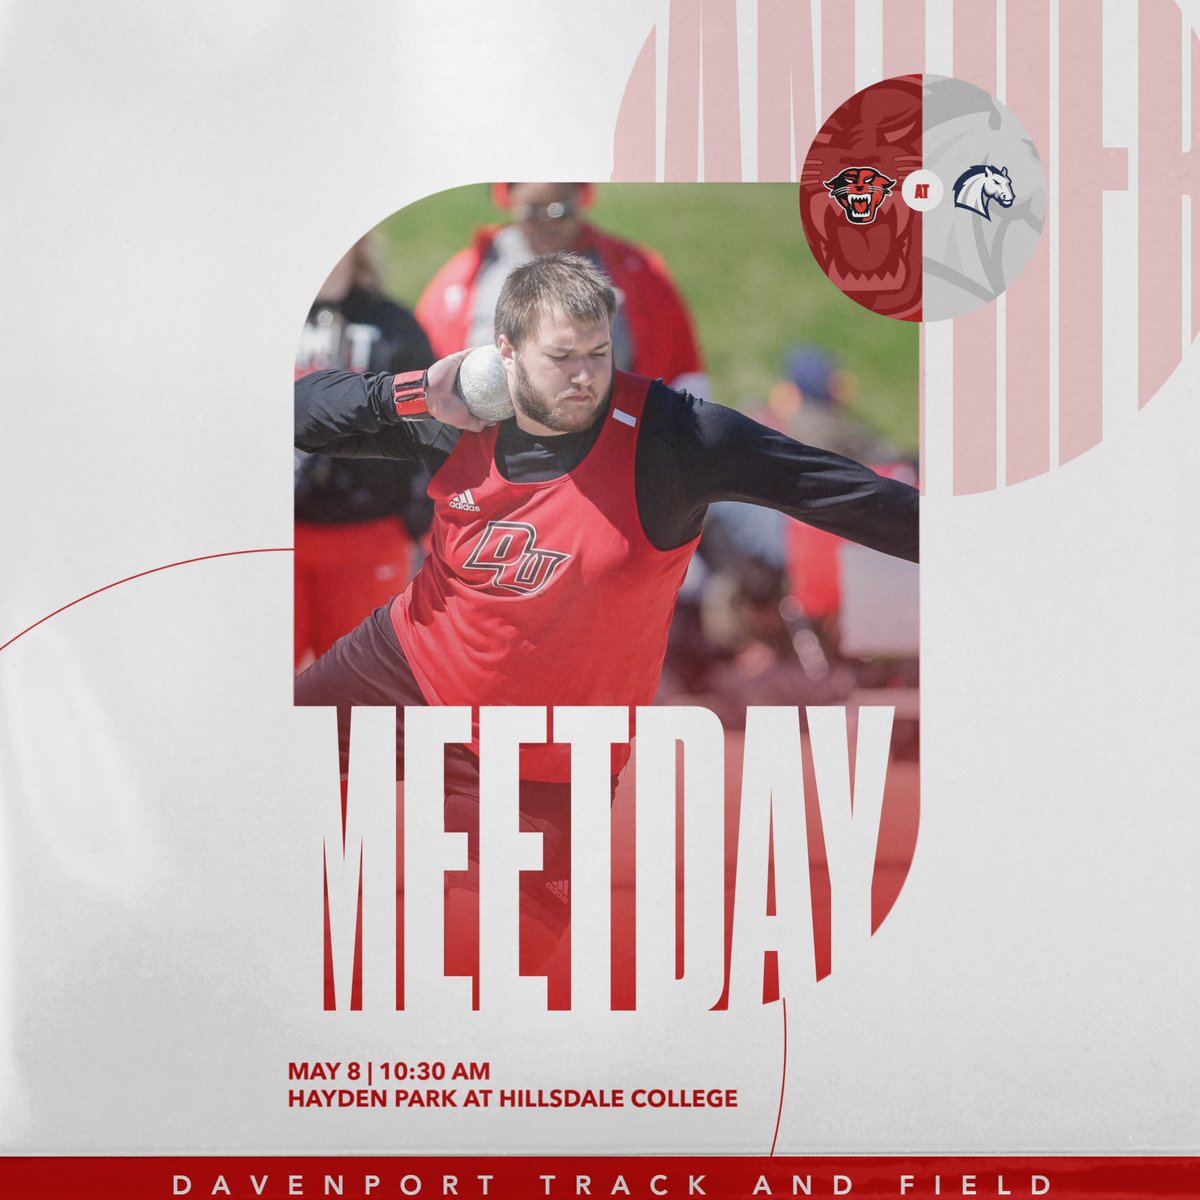 Track and Field will be sending a handful of student-athletes to the Hillsdale Last Chance Meet today beginning at 10:30 AM. #DUWork #DUTF

📊http://34.207.125.157/current/index.htm